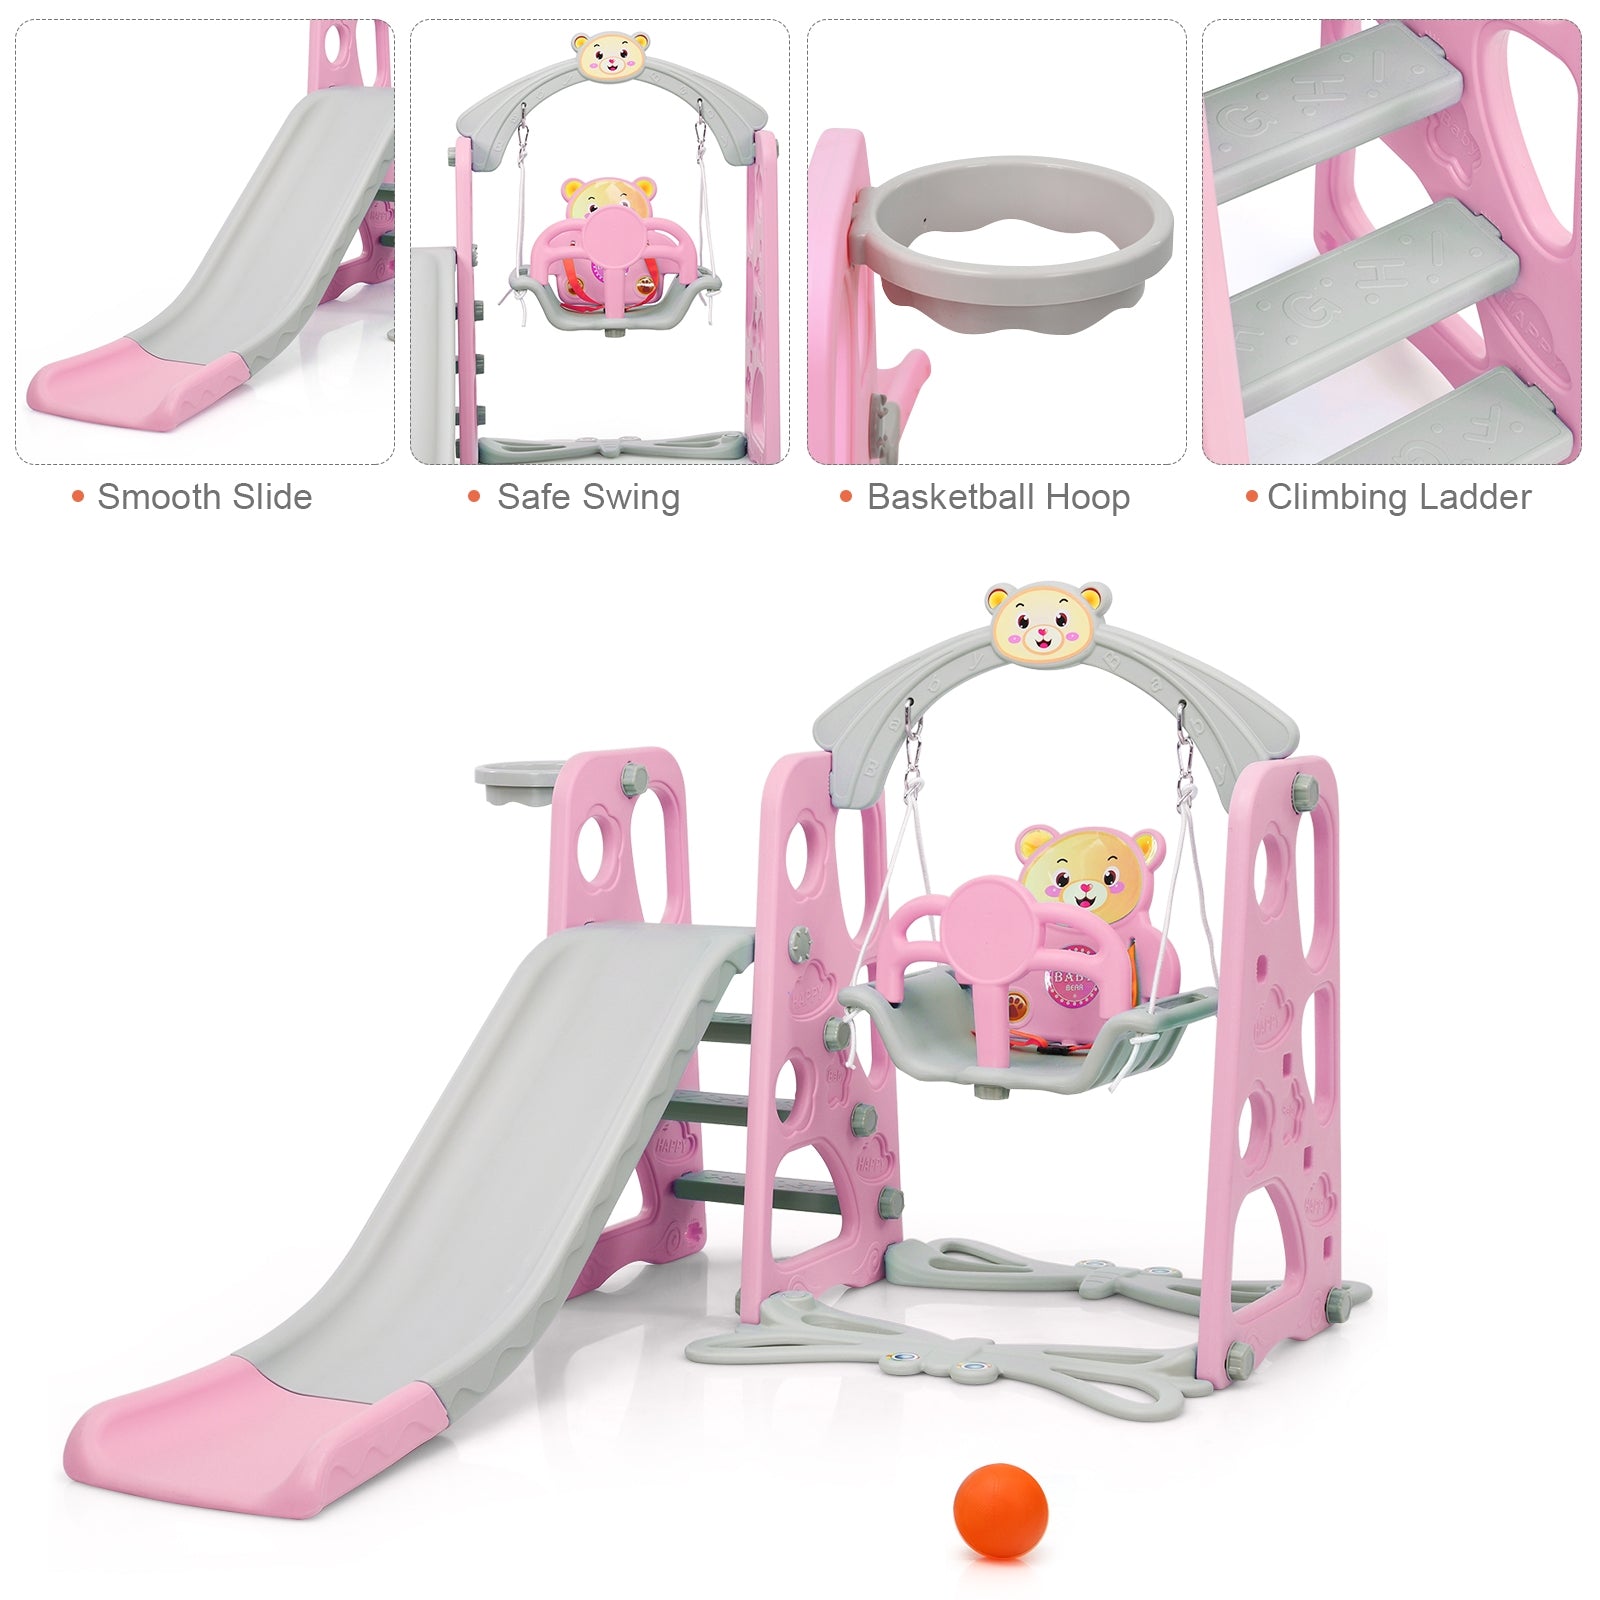 User-Friendly Design and Easy Assembly: The ladder features letter patterns to prevent slipping, ensuring additional safety for kids. The play set is designed without any burrs to protect delicate skin and prevent injuries during playtime. Assembling the set is a breeze, with clear instructions provided for quick and hassle-free setup.